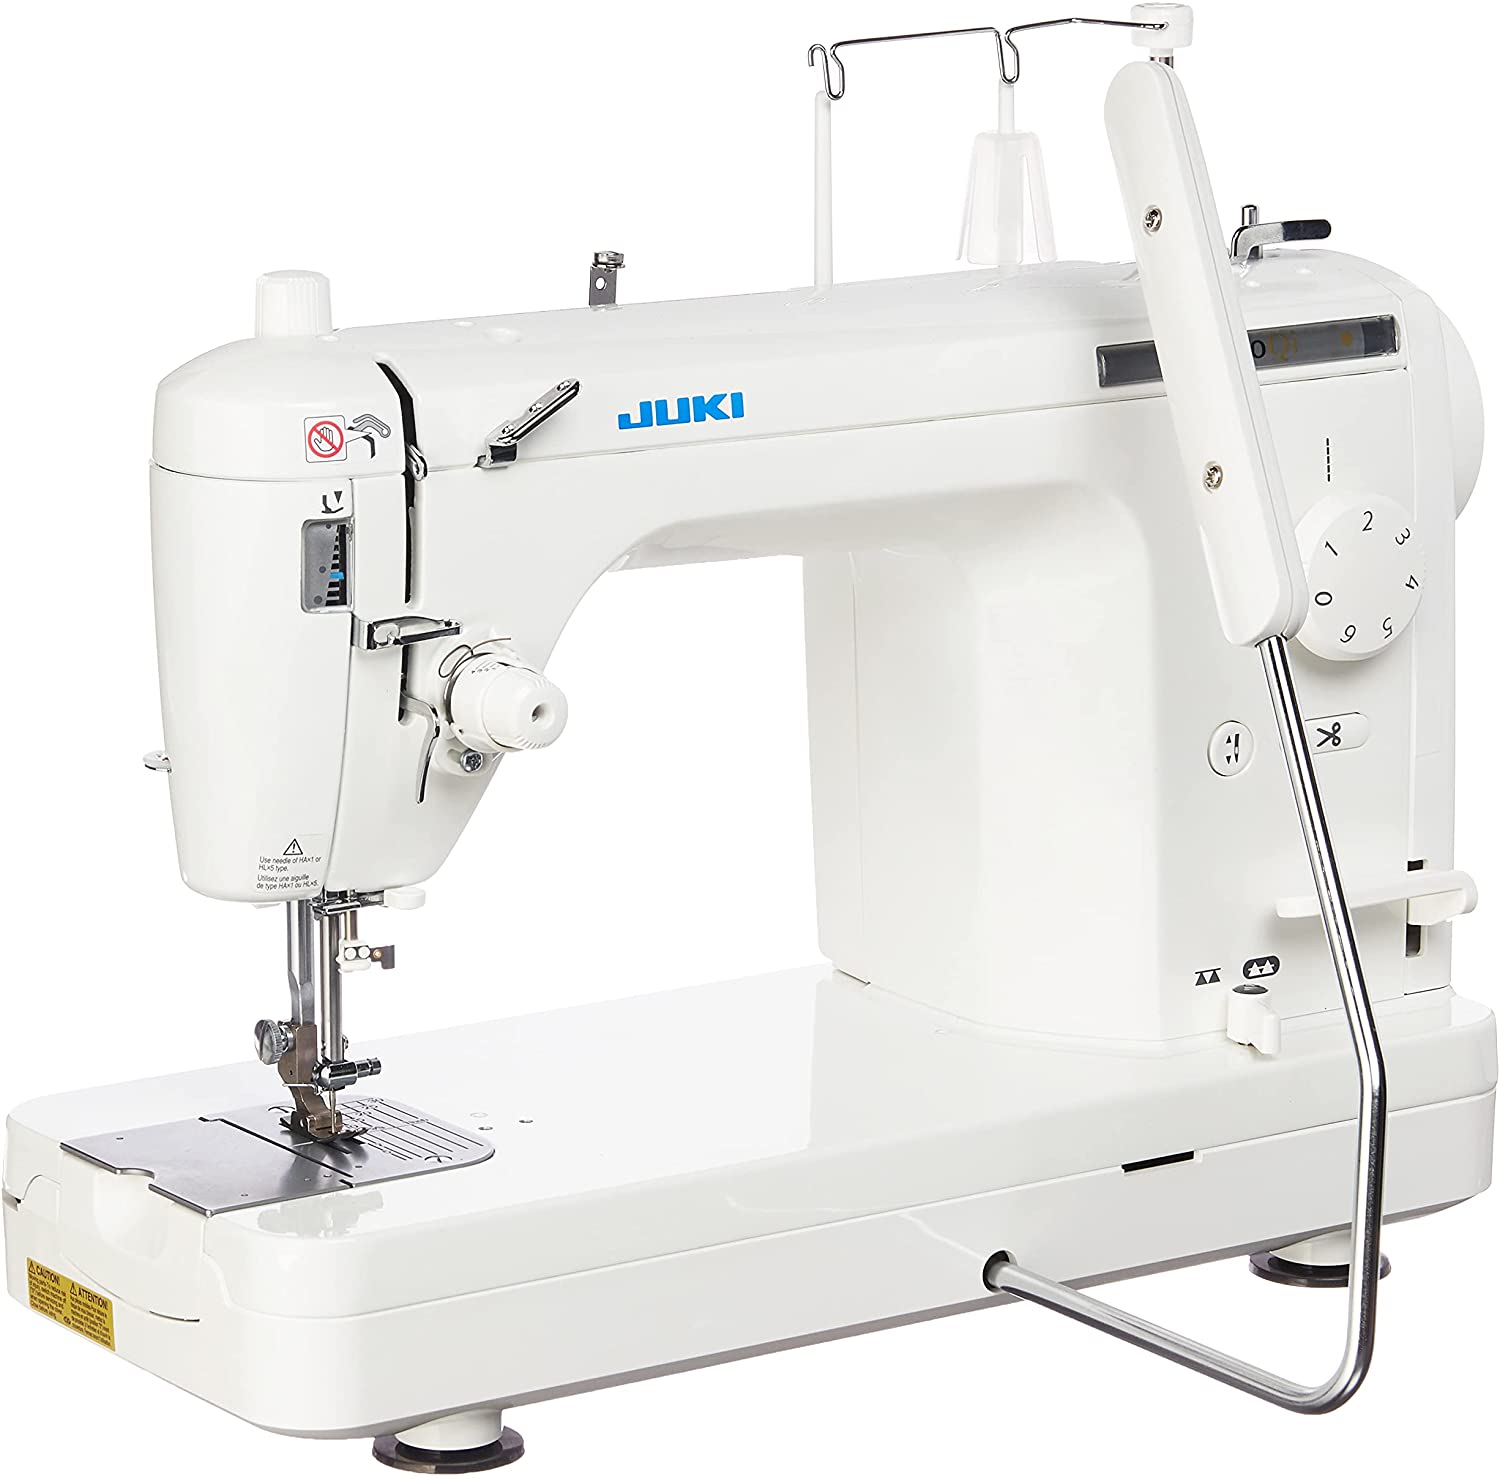 JUKI TL-2000Qi Sewing and Quilting Machine - Best Sewing Machine for Quilting and Embroidery